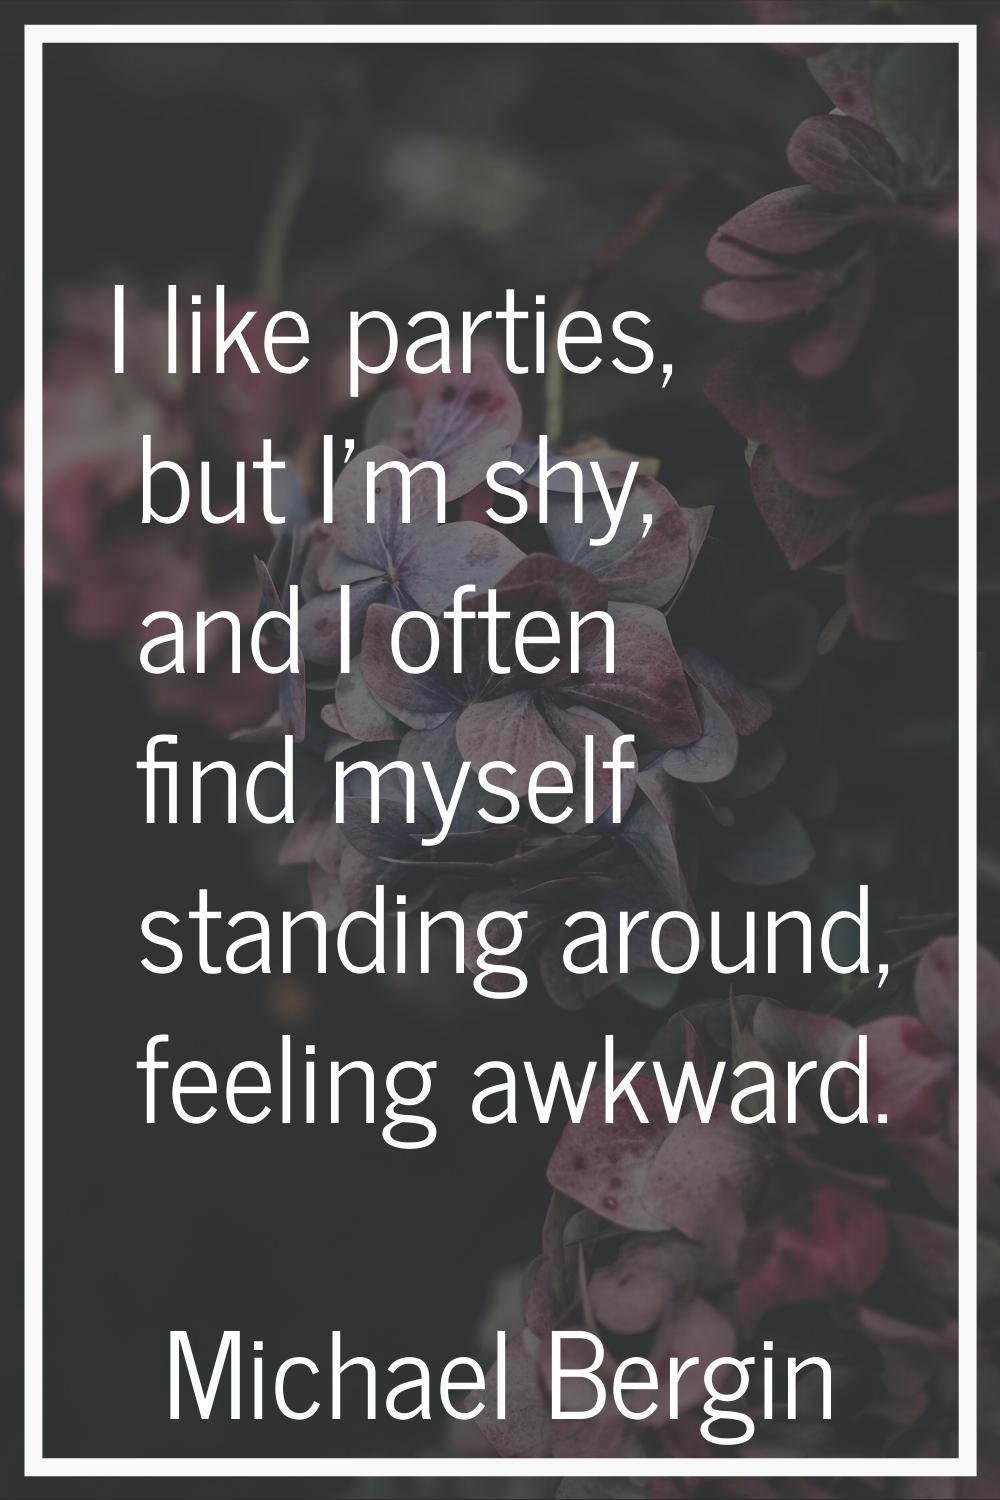 I like parties, but I'm shy, and I often find myself standing around, feeling awkward.